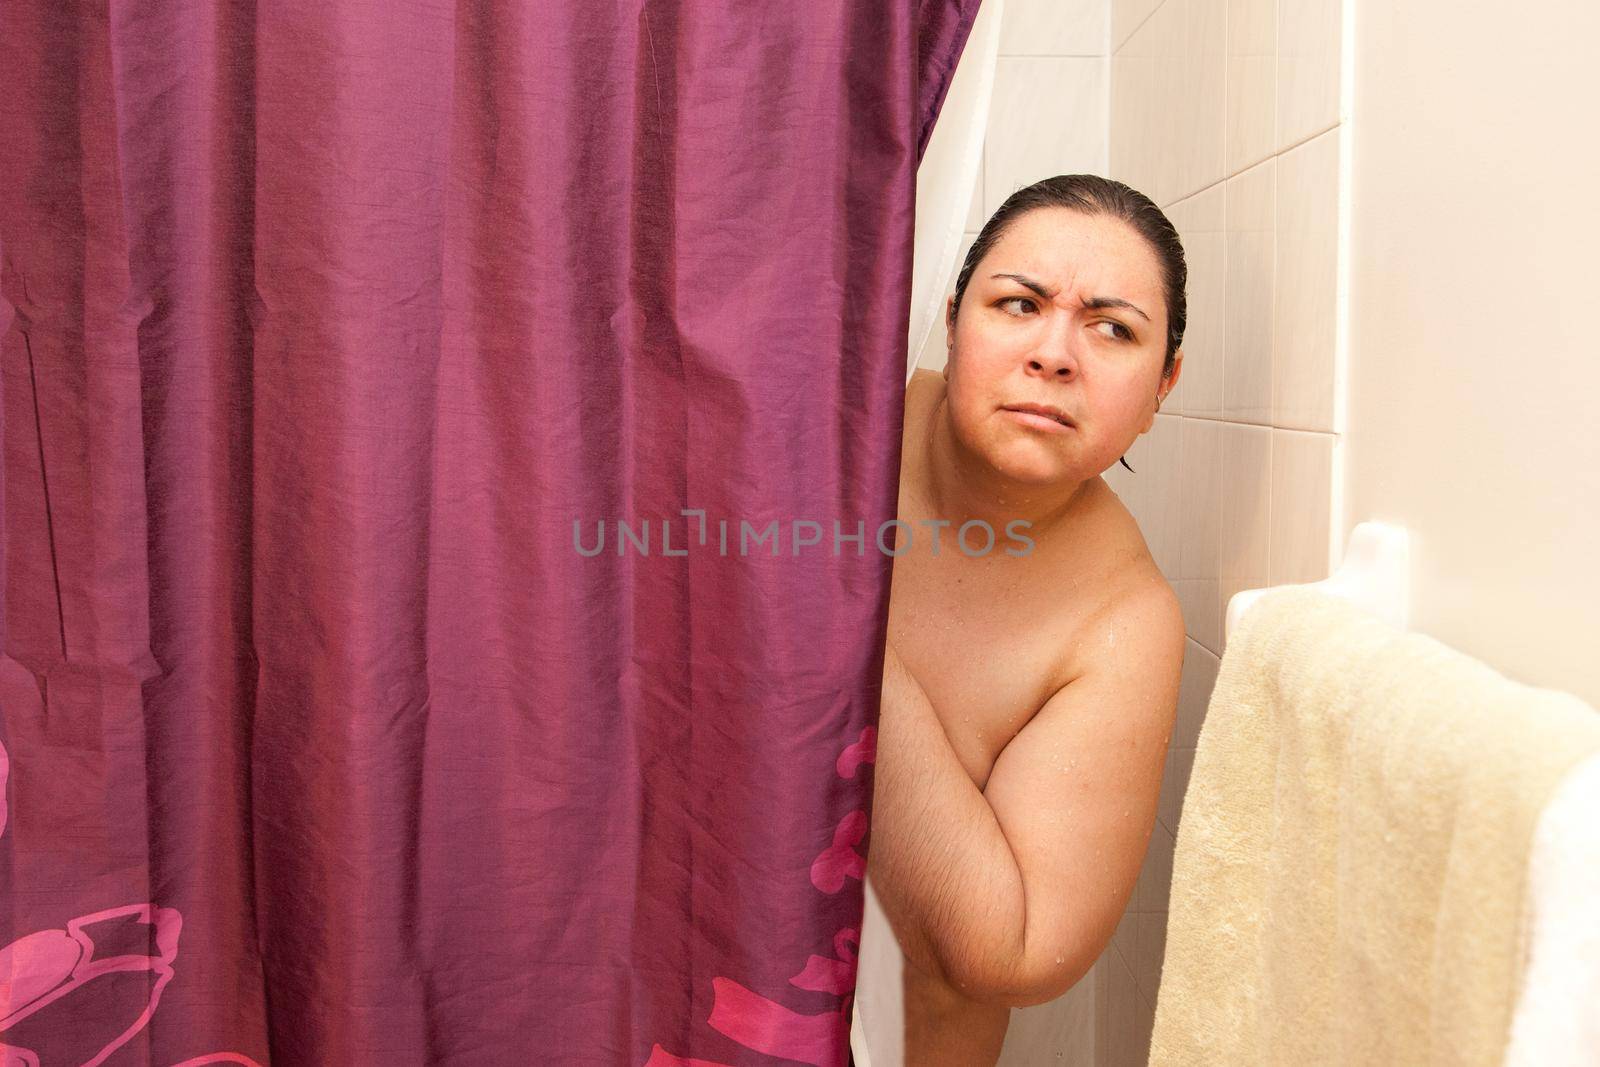 Nervous woman in shower  by rustycanuck